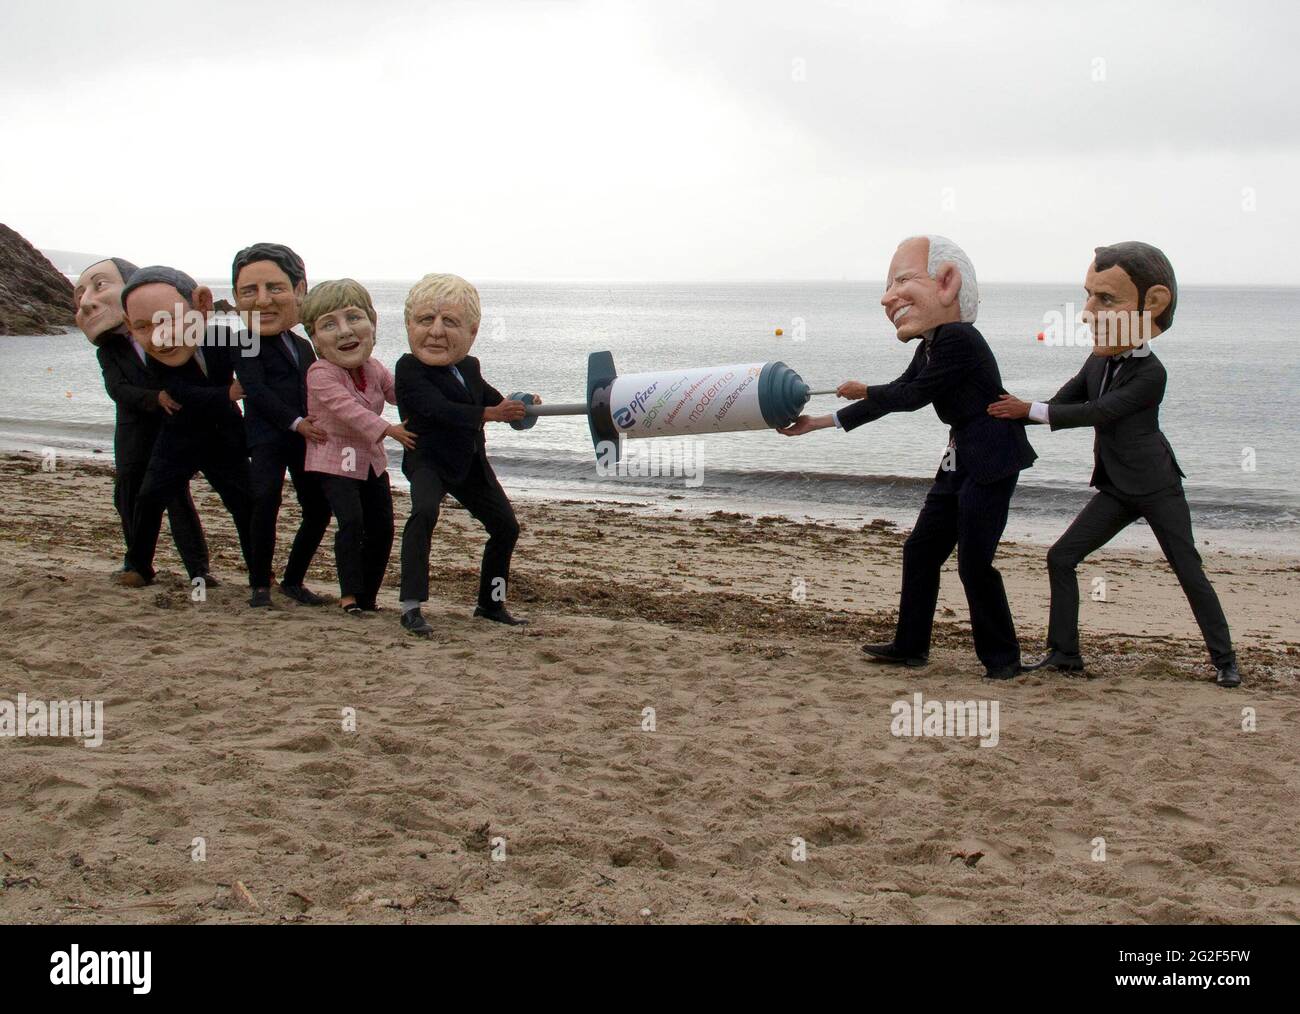 Cornwall, UK. June 11 2021: People dressed as members of the G7 play tug of war with a big vaccine needle, on Swanpool beach, Cornwall. This is part of the People's Vaccine group, protesting at the G7. 11th June 2021. Anna Hatfield/Pathos Credit: One Up Top Editorial Images/Alamy Live News Stock Photo